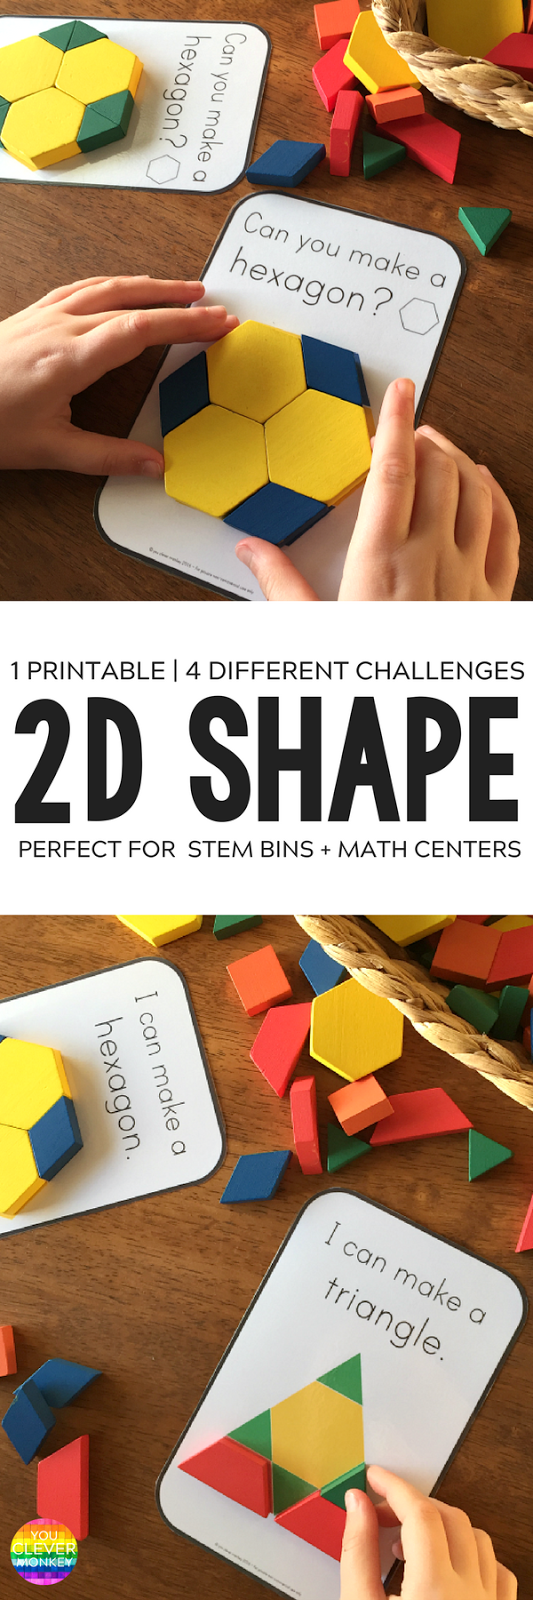 2D Shape STEM Pattern Block Challenge Cards - Grab these printable 2D Shape STEM challenge cards to add to your pattern blocks! Hands-on way for kindergarten aged children and first graders to learn how to make new shapes from other 2D shapes. These easy to prep printable 2D shape cards include three different sets of cards to challenge children while they learn about shapes and geometry in math while making differentiation easier than ever! #kindergartenmathcenters #stemcenters #firstgrademath #2dshapes #patternblockactivities